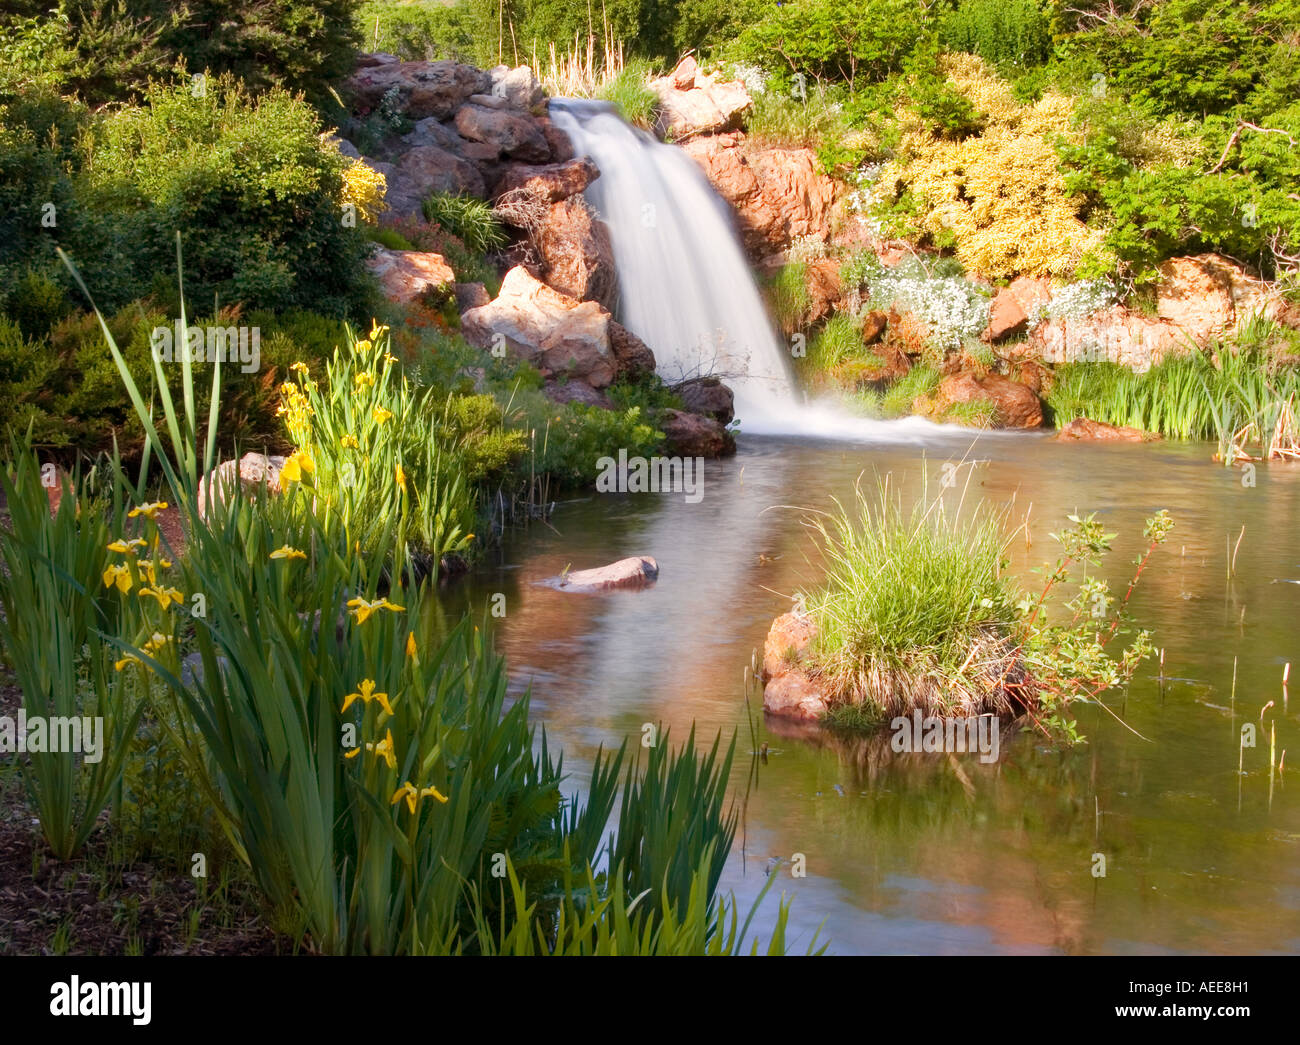 The Waterfall At Red Butte Gardens Part Of The University Of Utah